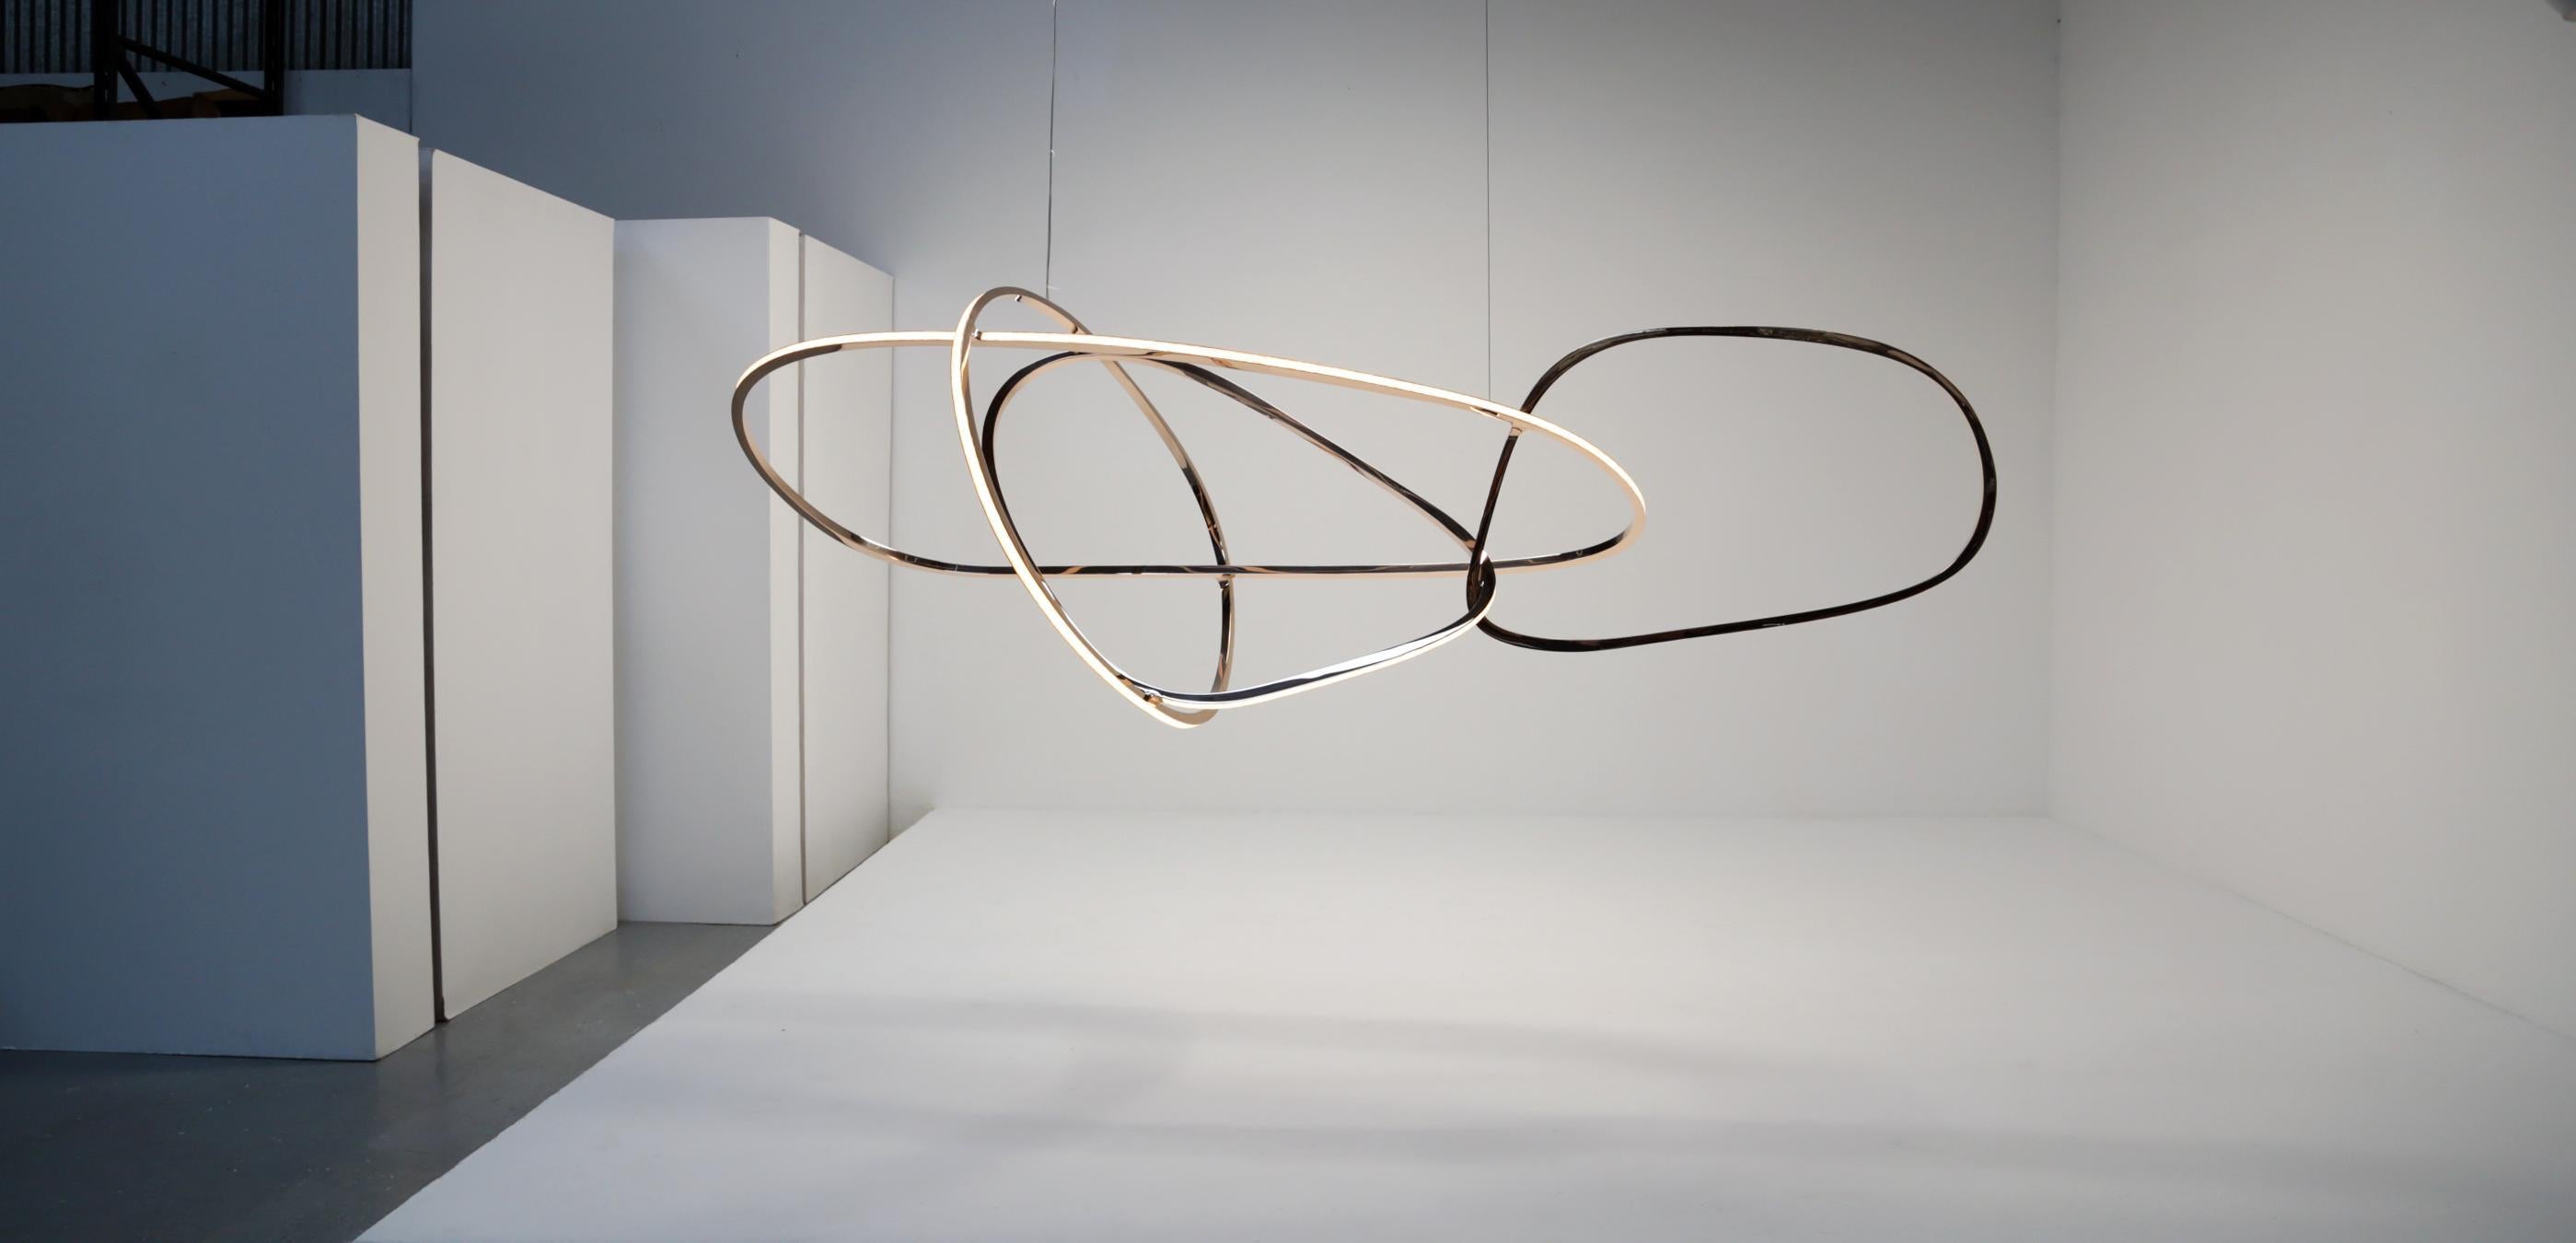 Niamh Barry’s work starts as line drawings. She is inspired by forms and movements in the natural word that evoke emotion and her finished pieces are compositions that translate these into bronze and light. With this piece the artist has created a